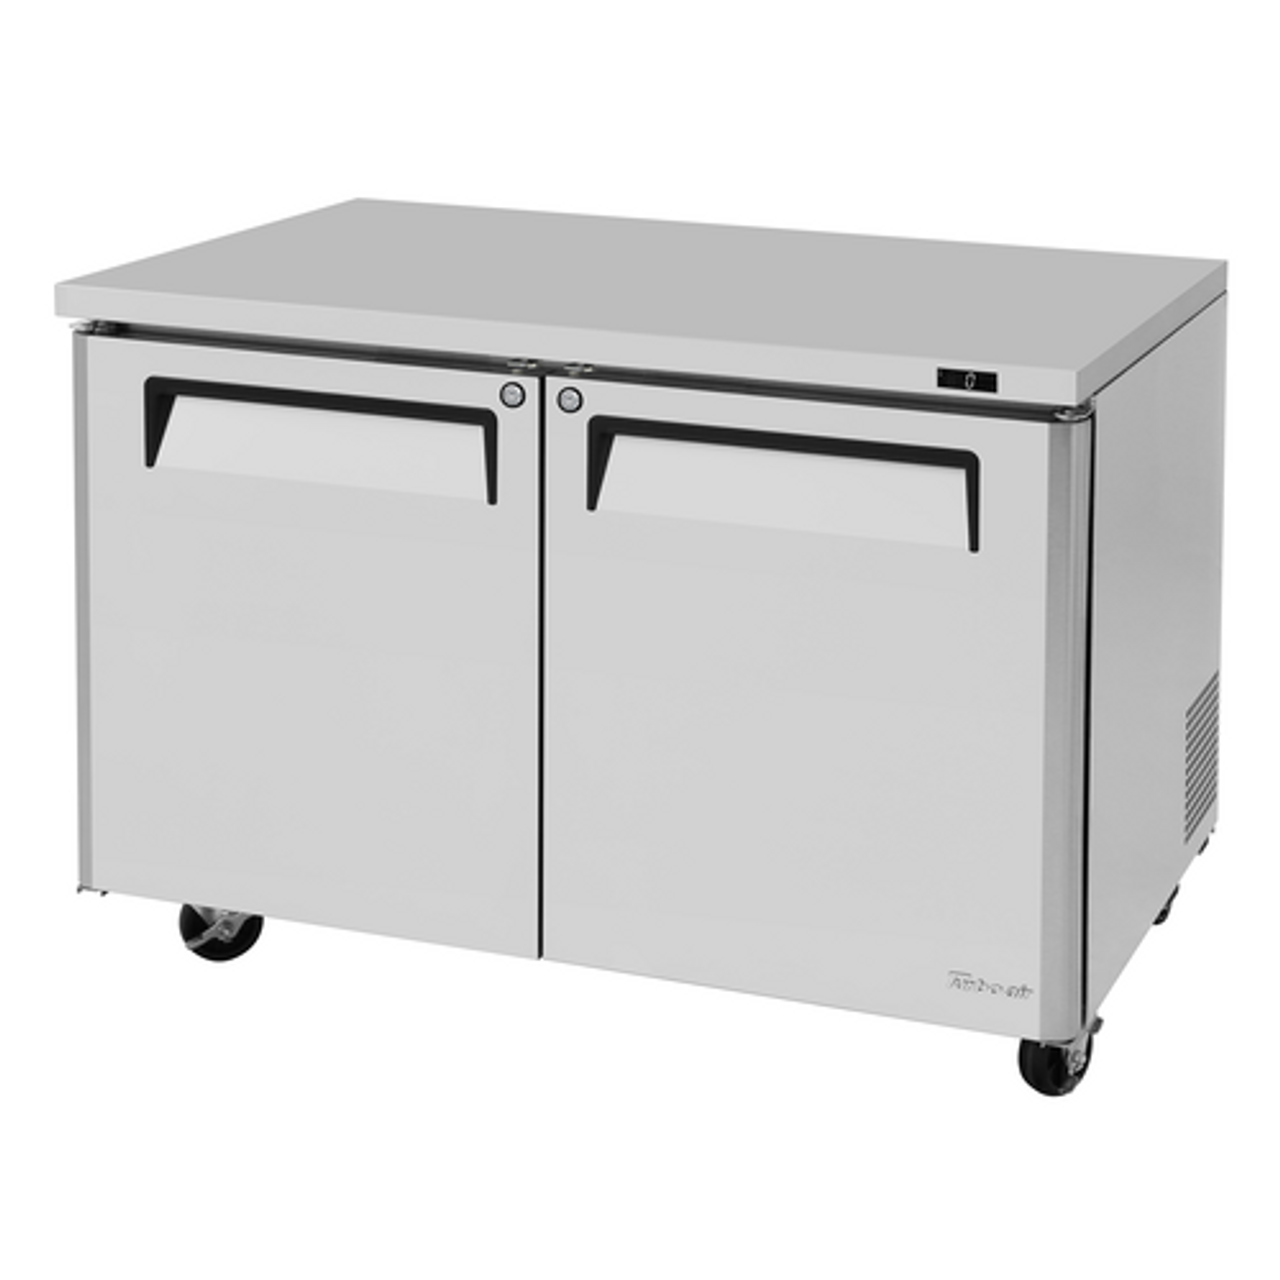 Turbo Air MUF-48-N 2 Section Reach In Under Counter 48" Freezer- M3 Series